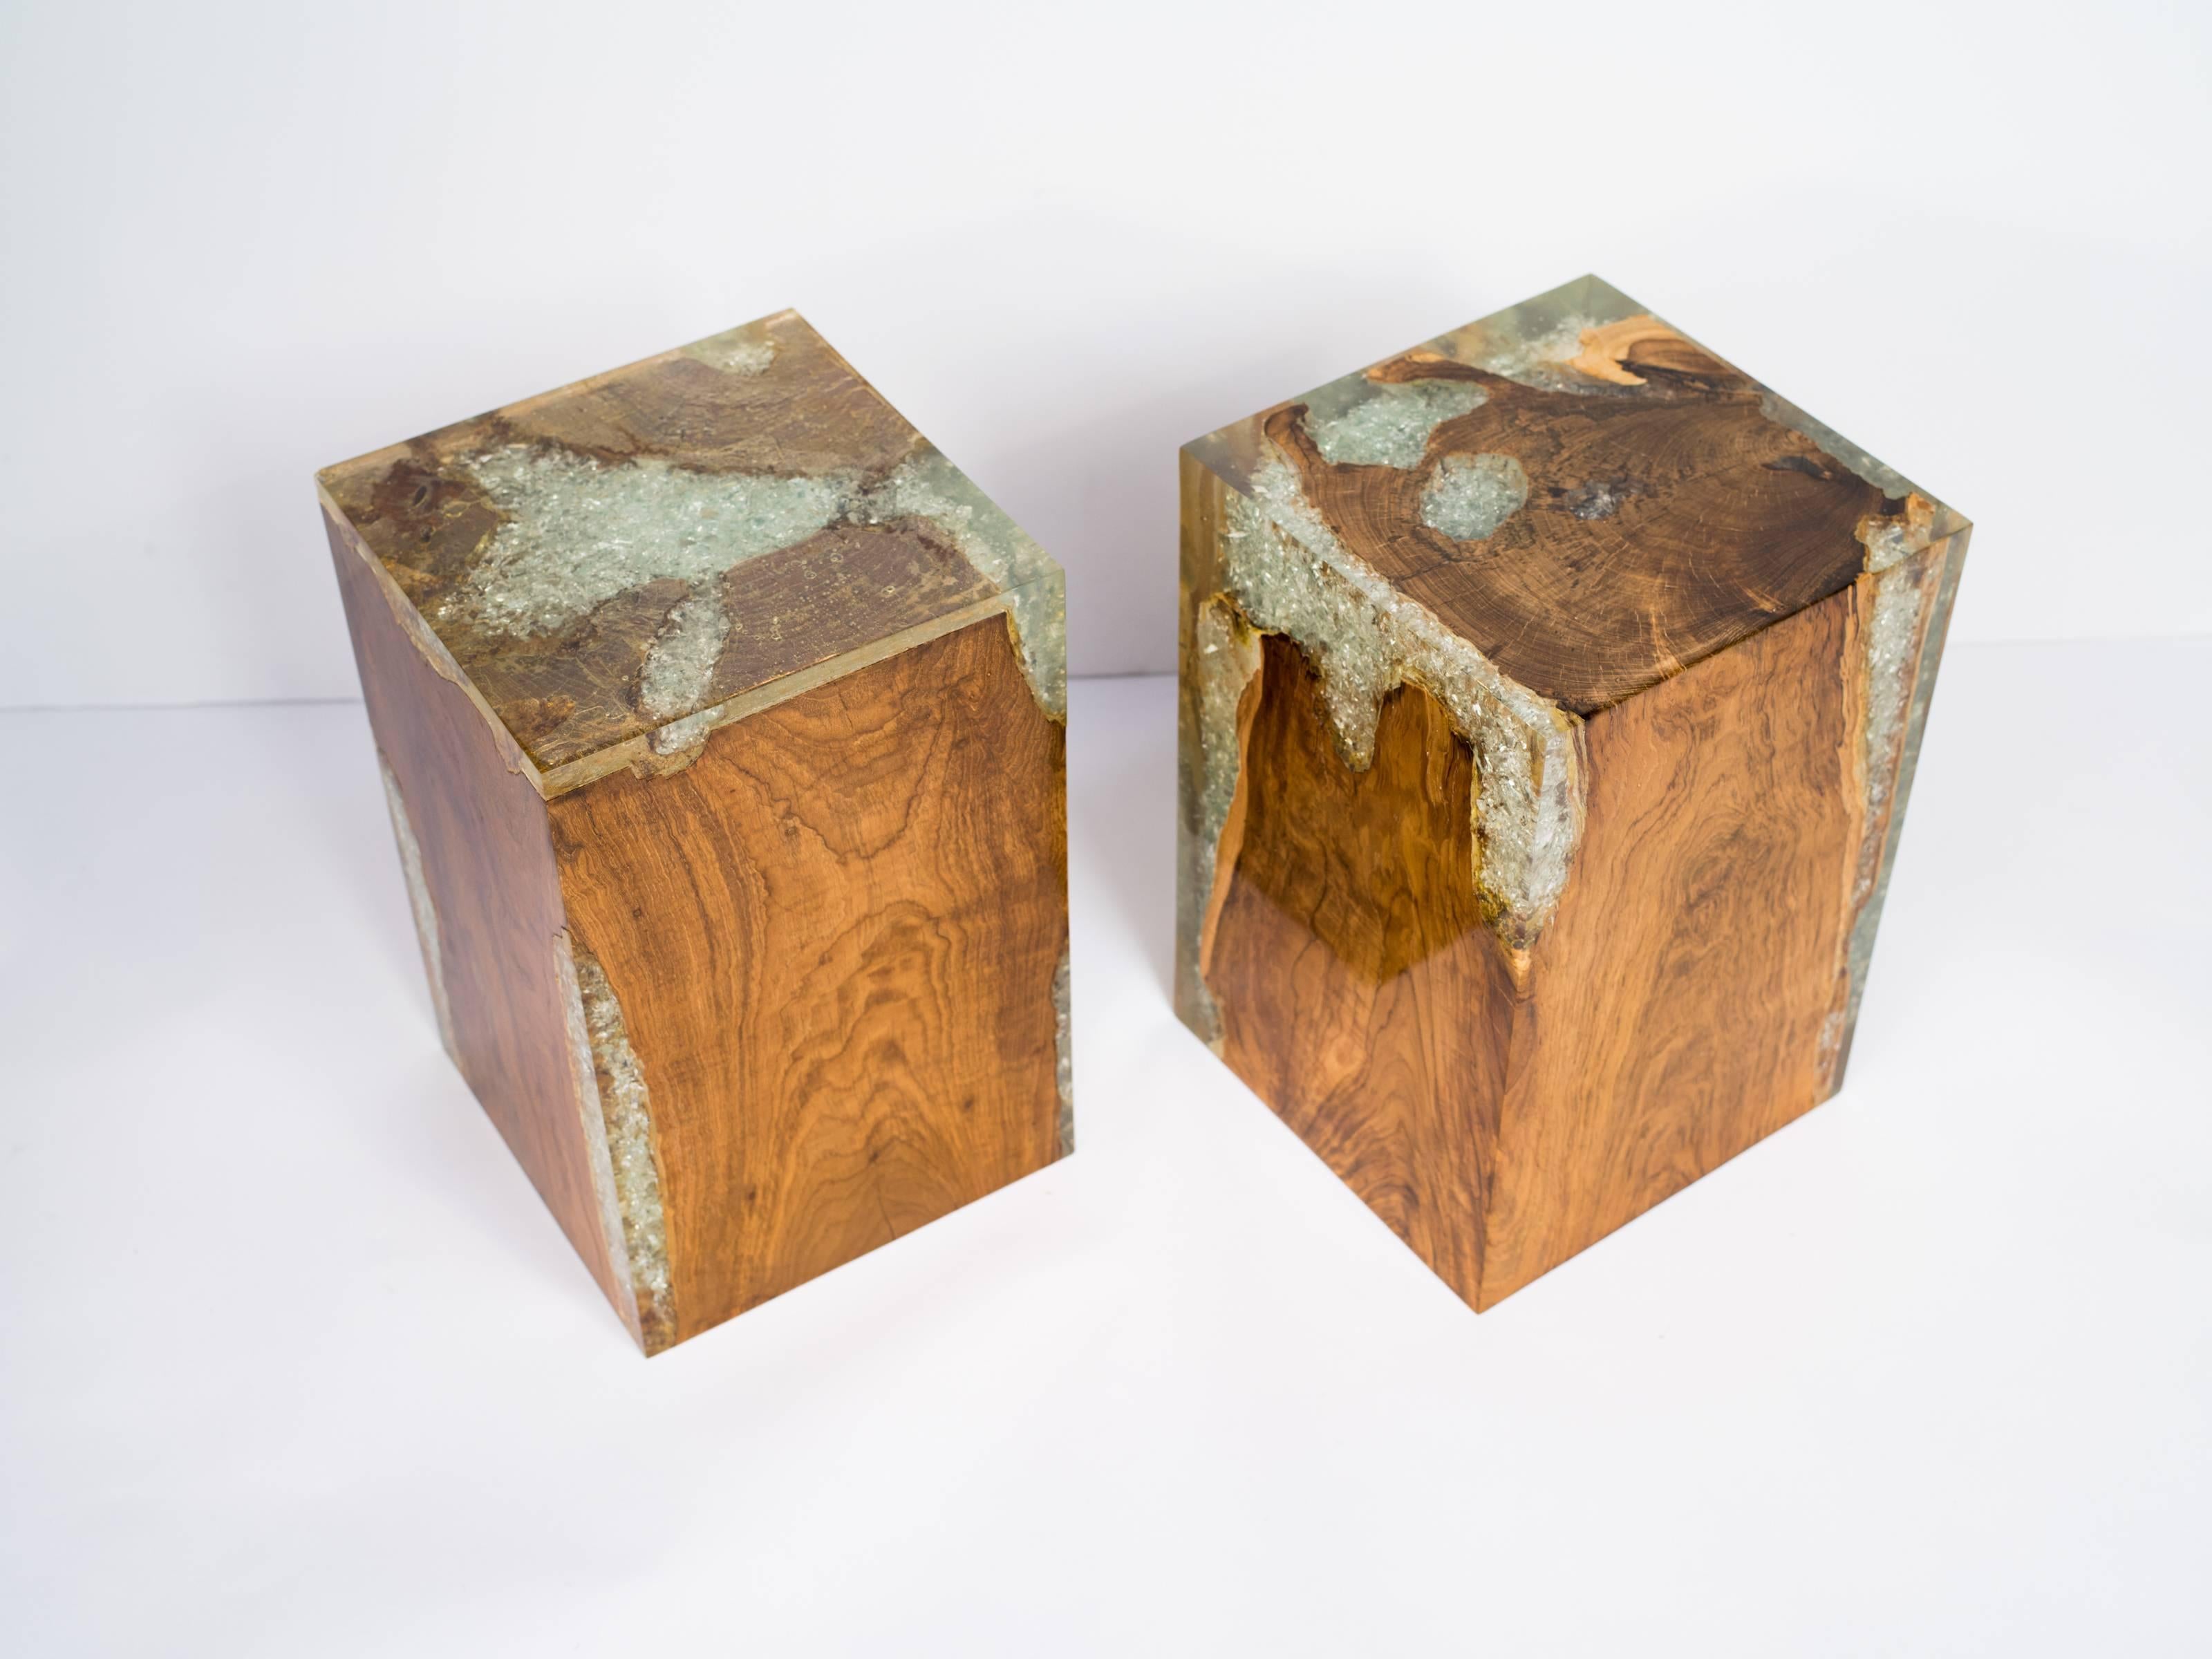 Indonesian Organic Teak Wood and Cracked Resin Cube Tables